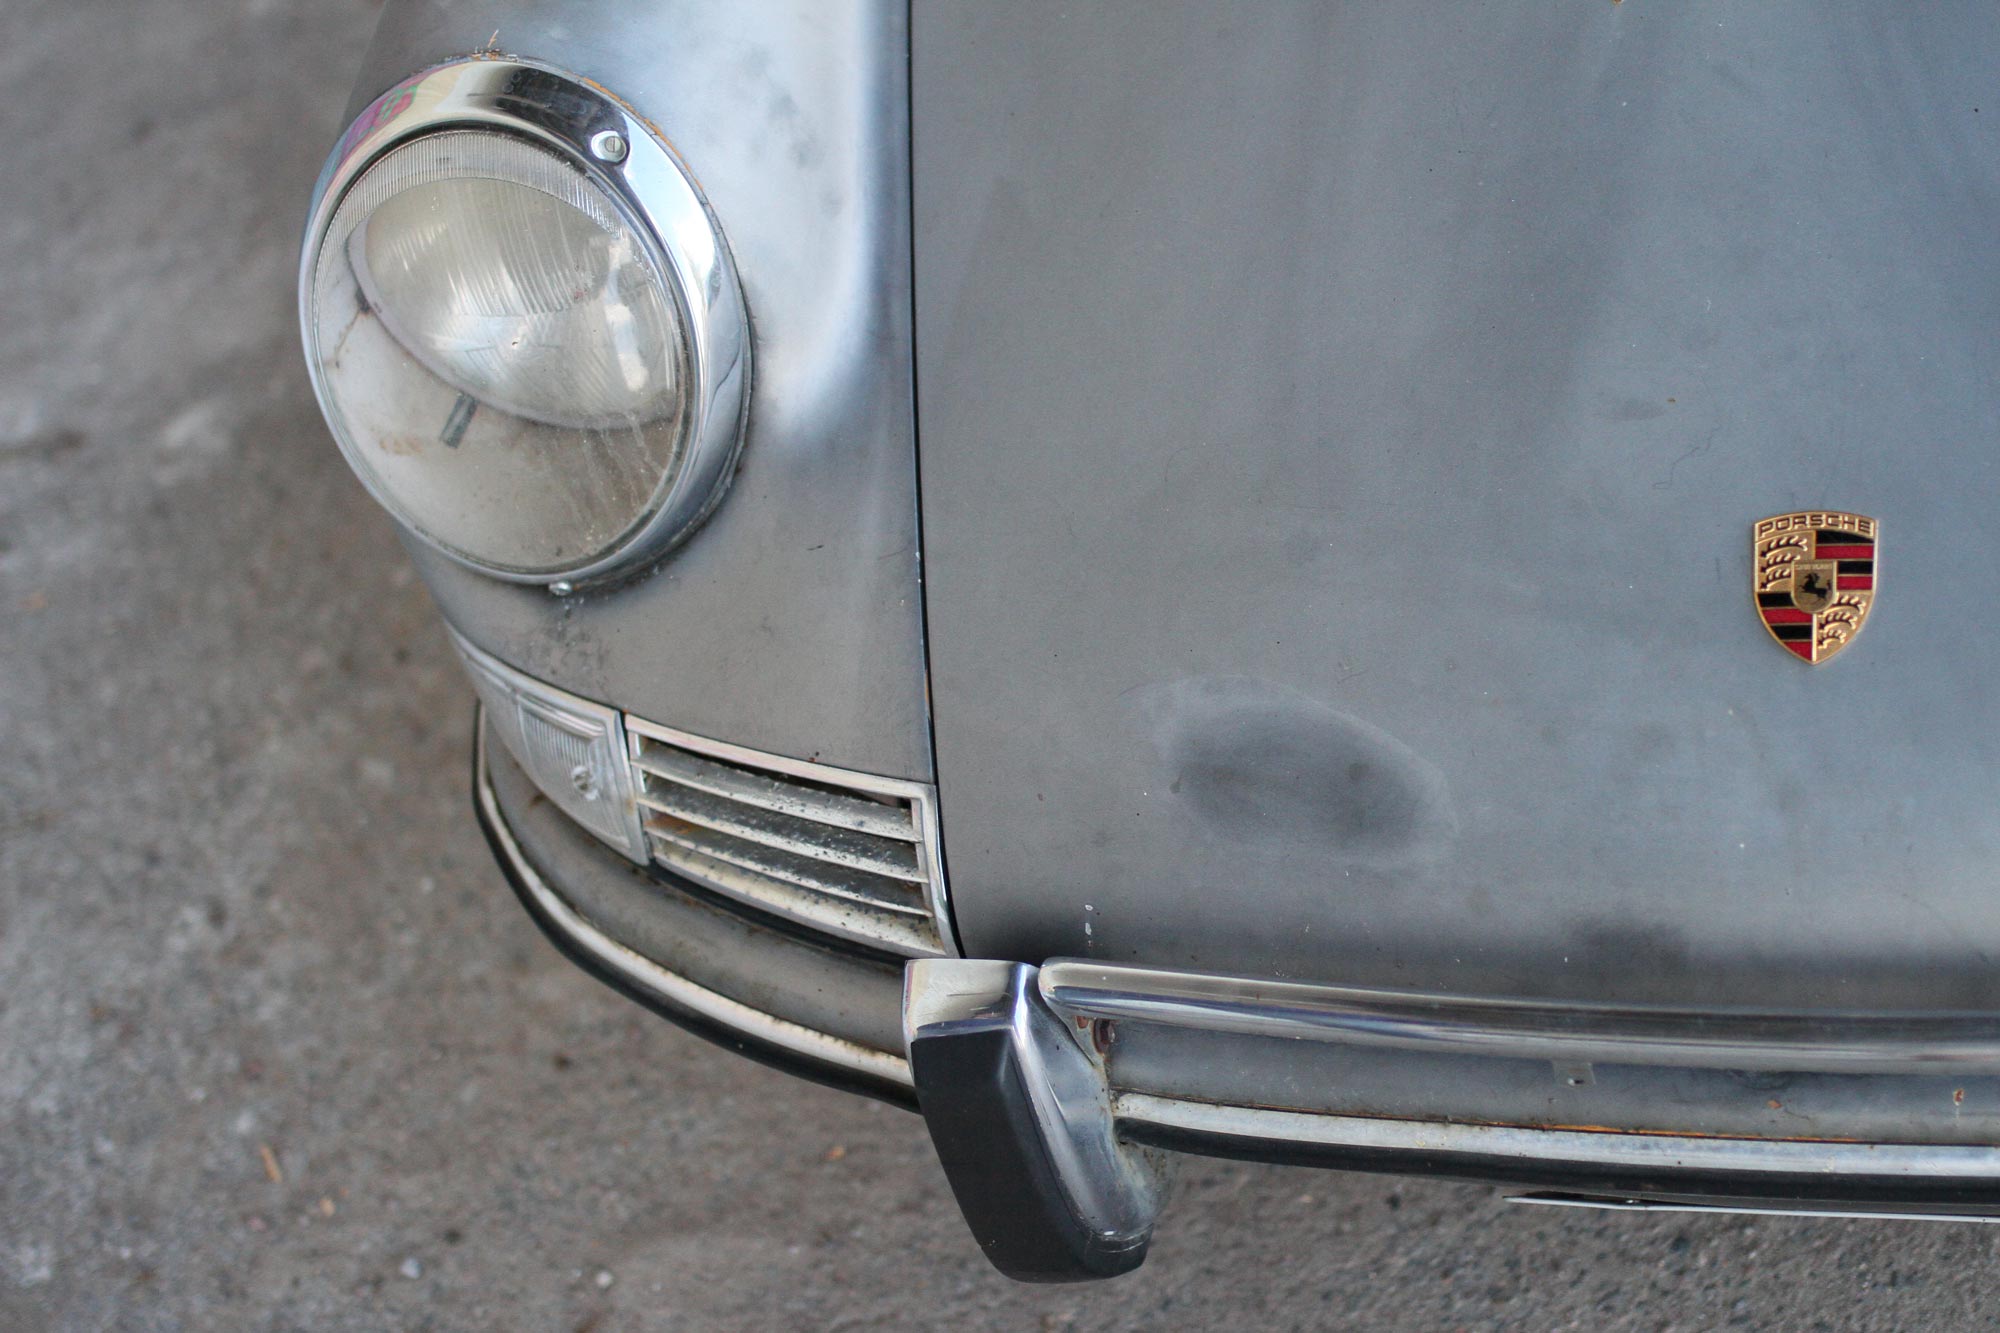 The Porsche badge in the front of the car together with the headlights on a patina 912